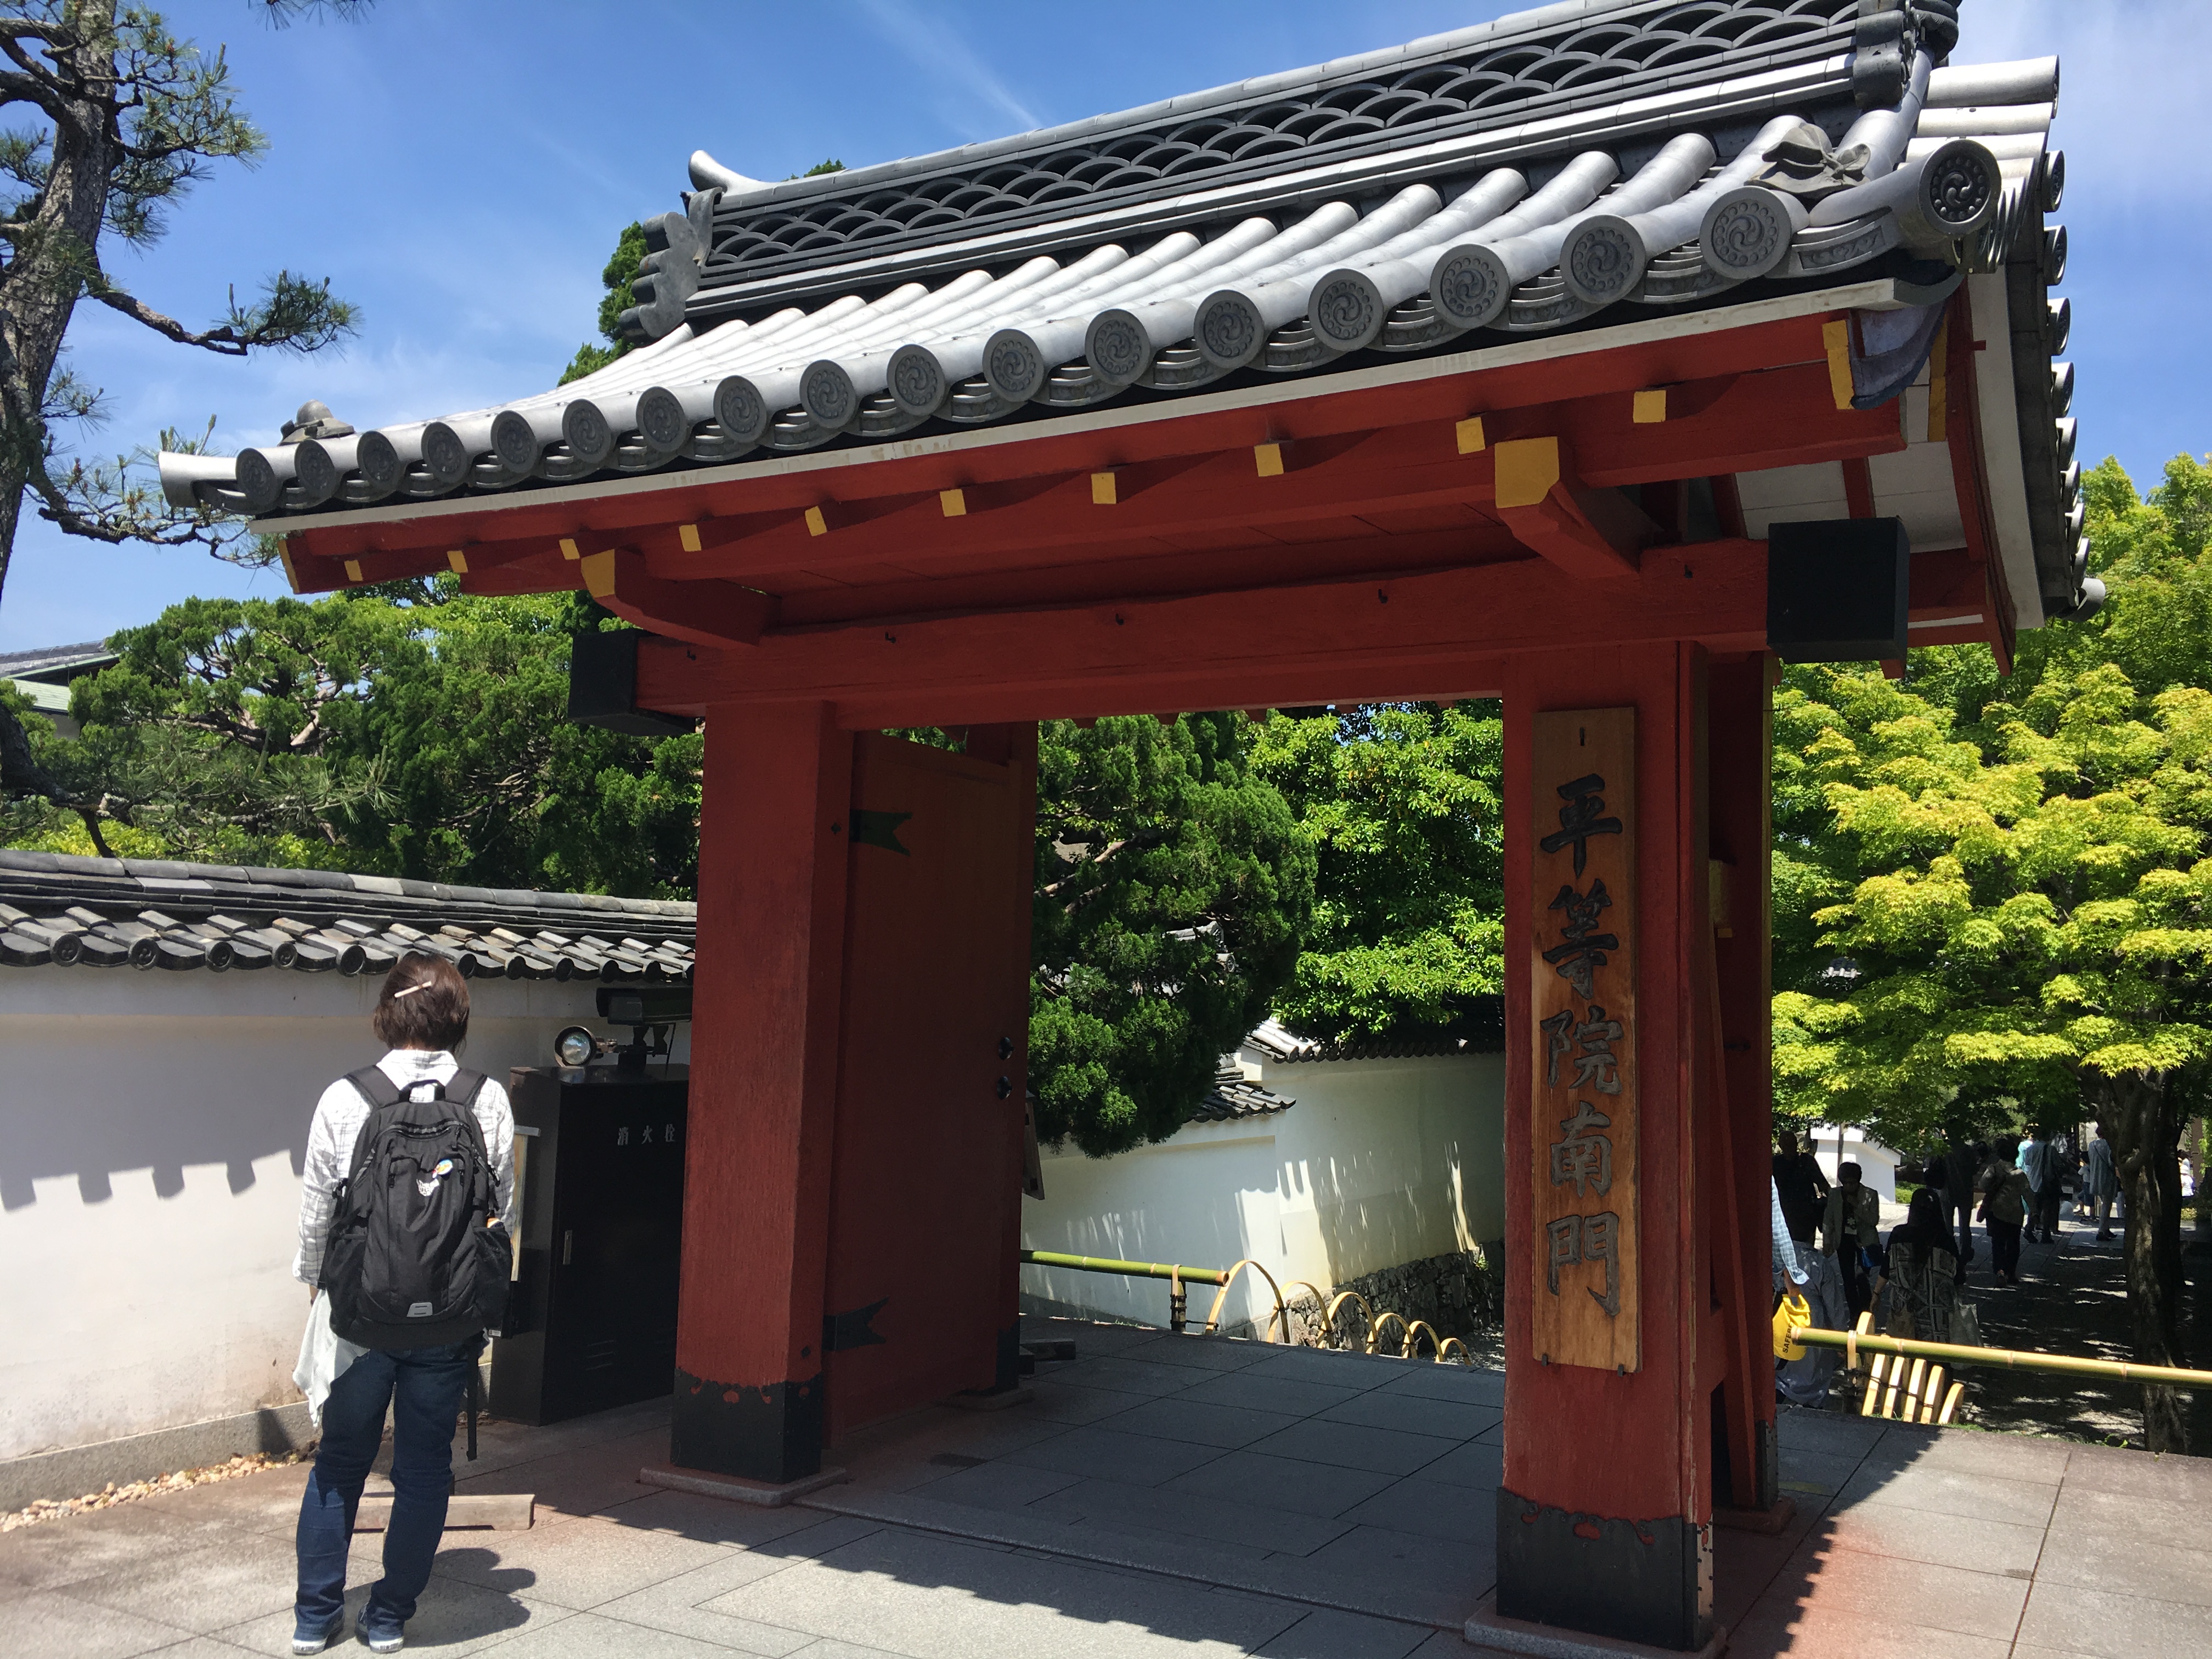 Entrance to Byodoin temple grounds